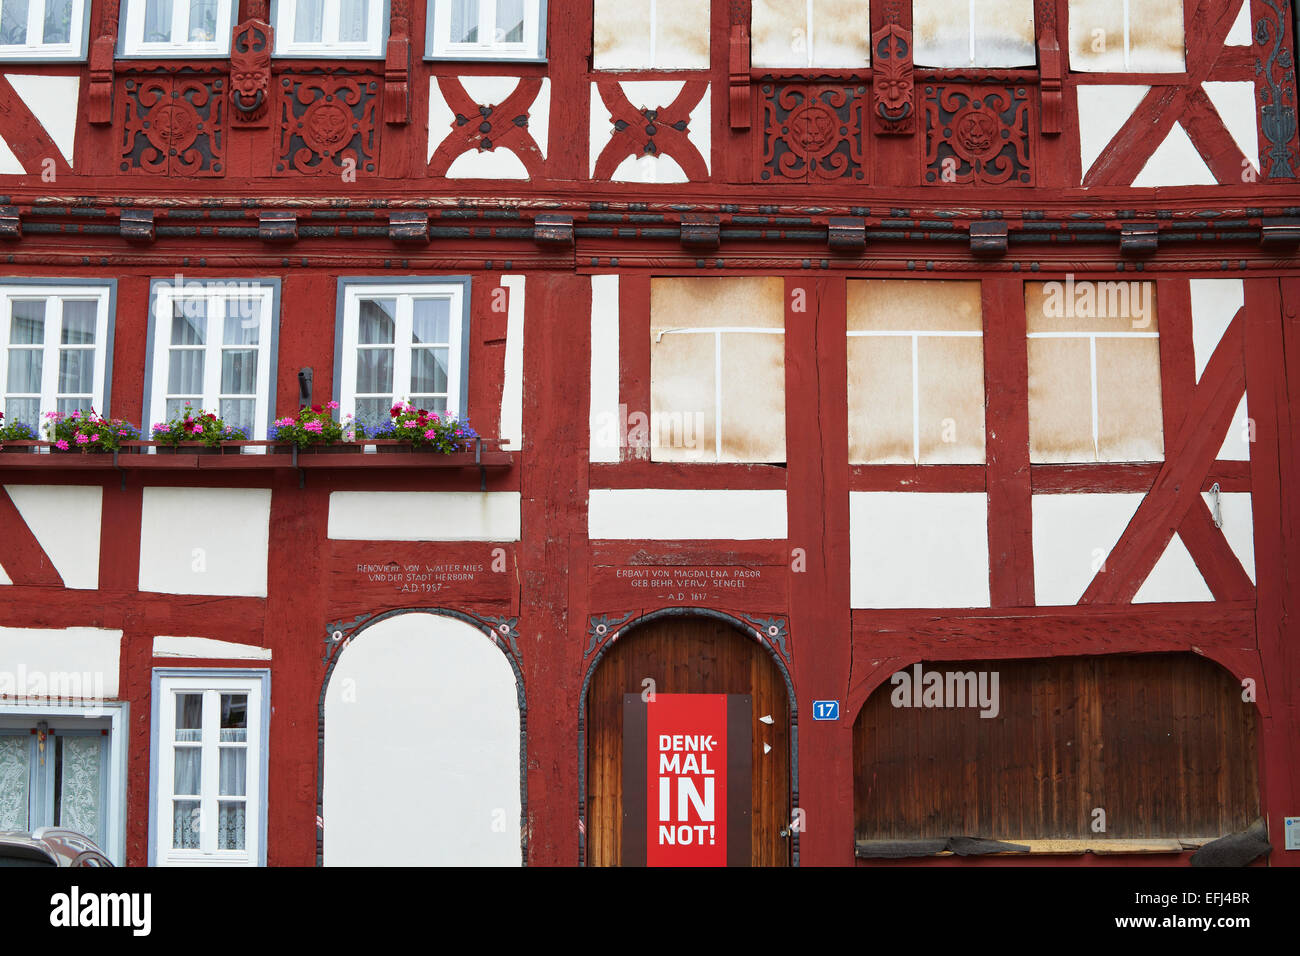 Twin house Kornmarkt 15-17 from 1617, Half-timbered house, Denkmal in Not, Herborn, Westerwald, Hesse, Germany, Europe Stock Photo